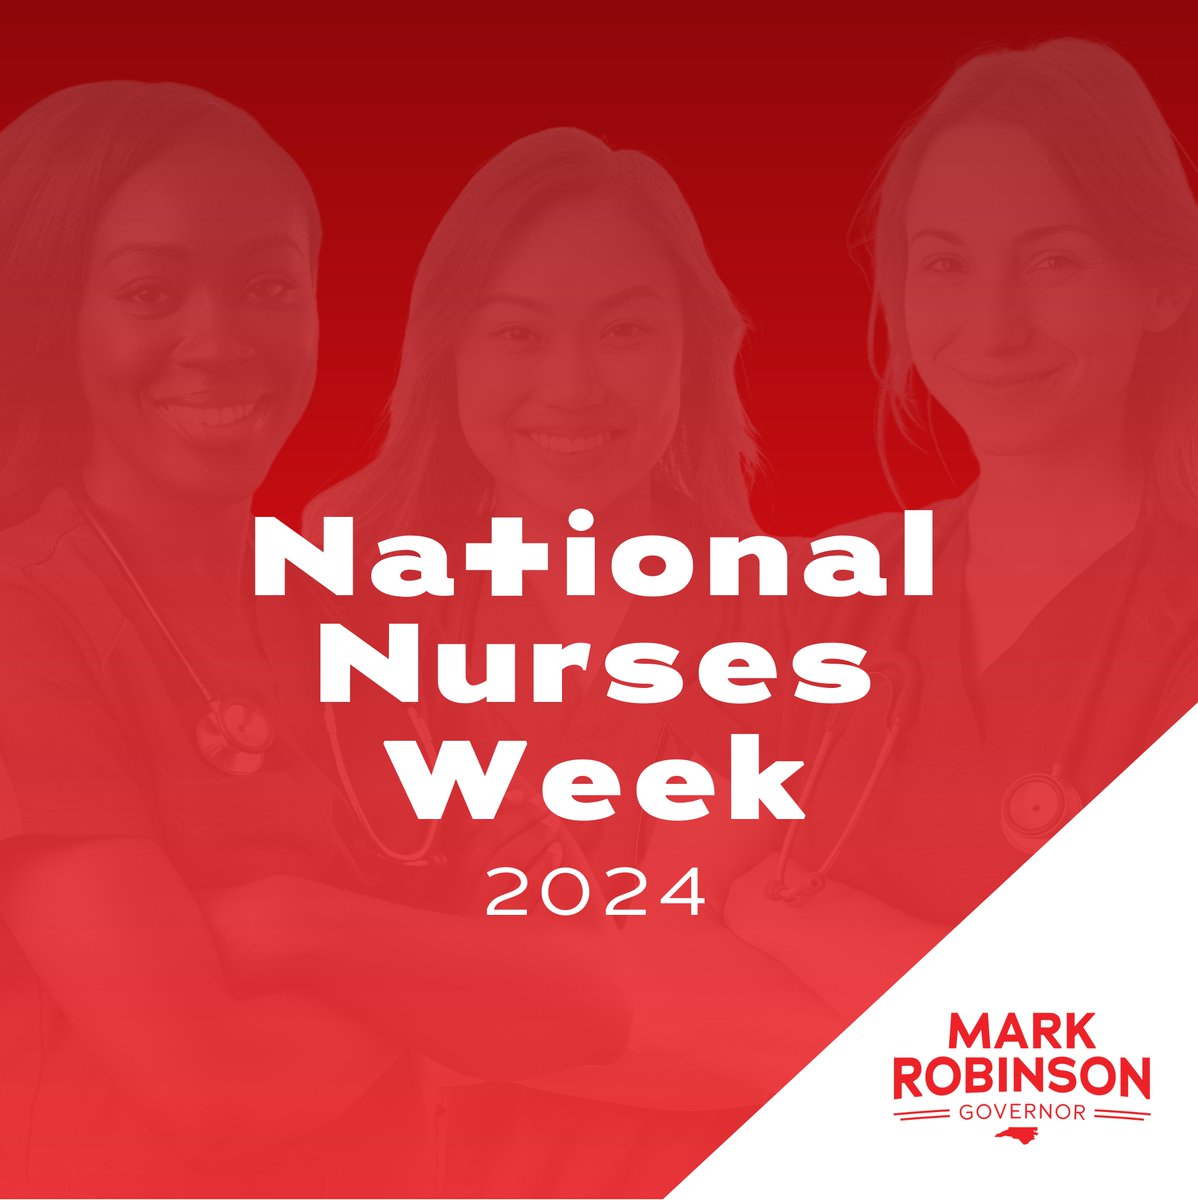 This week is National Nurses Week! We are grateful for all the nurses who work so hard to provide patient care and keep our communities, state, and country healthy!